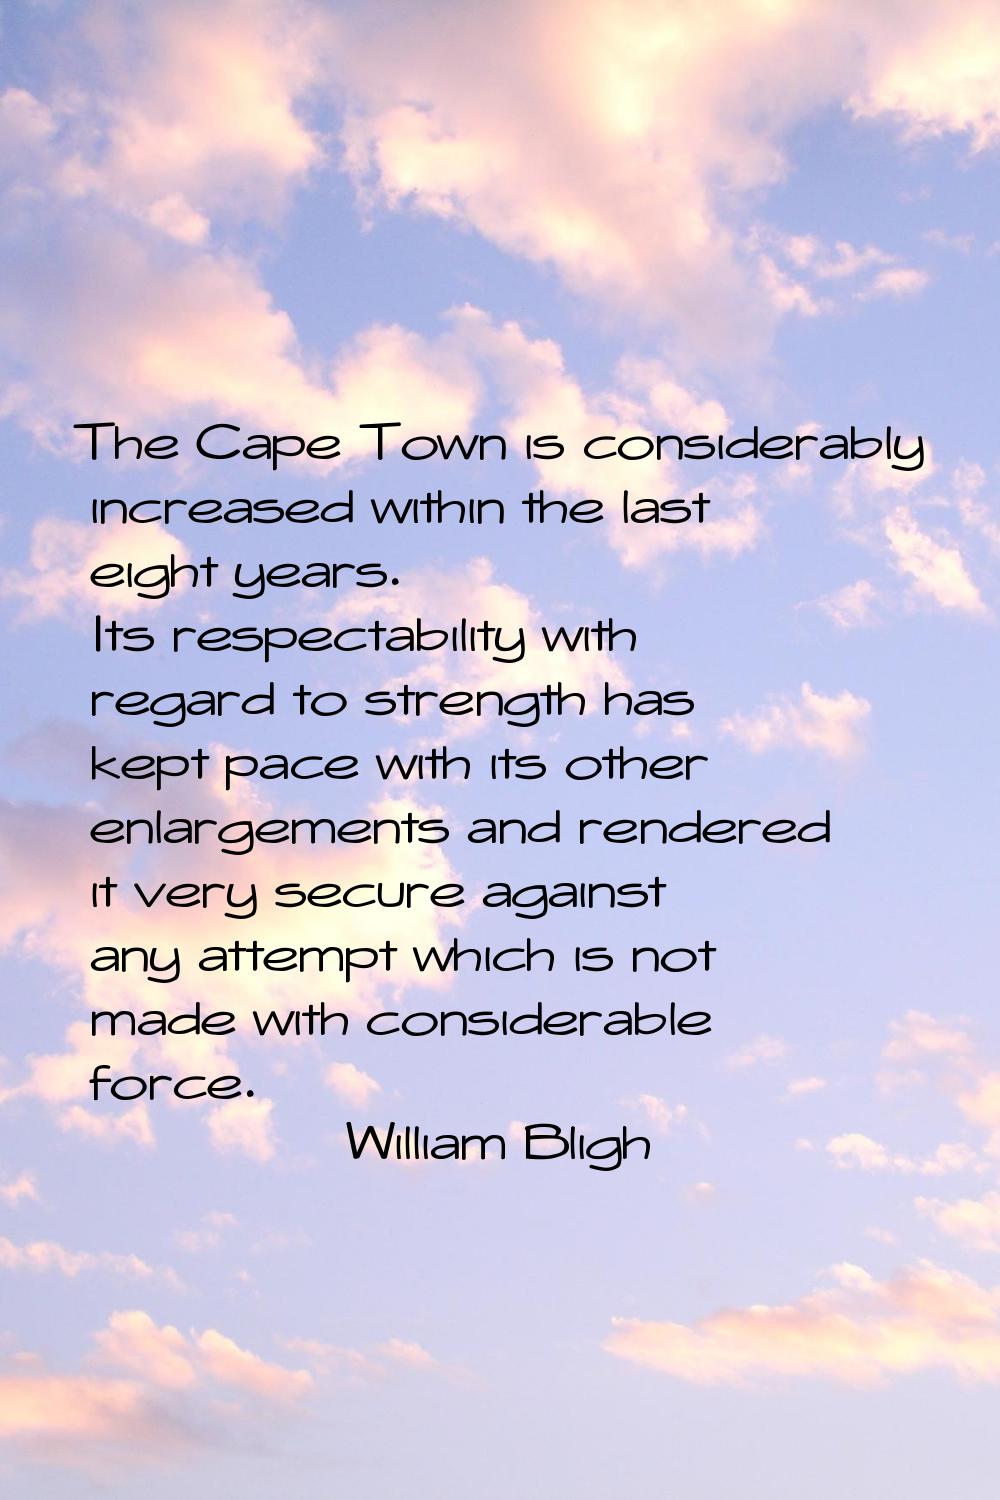 The Cape Town is considerably increased within the last eight years. Its respectability with regard